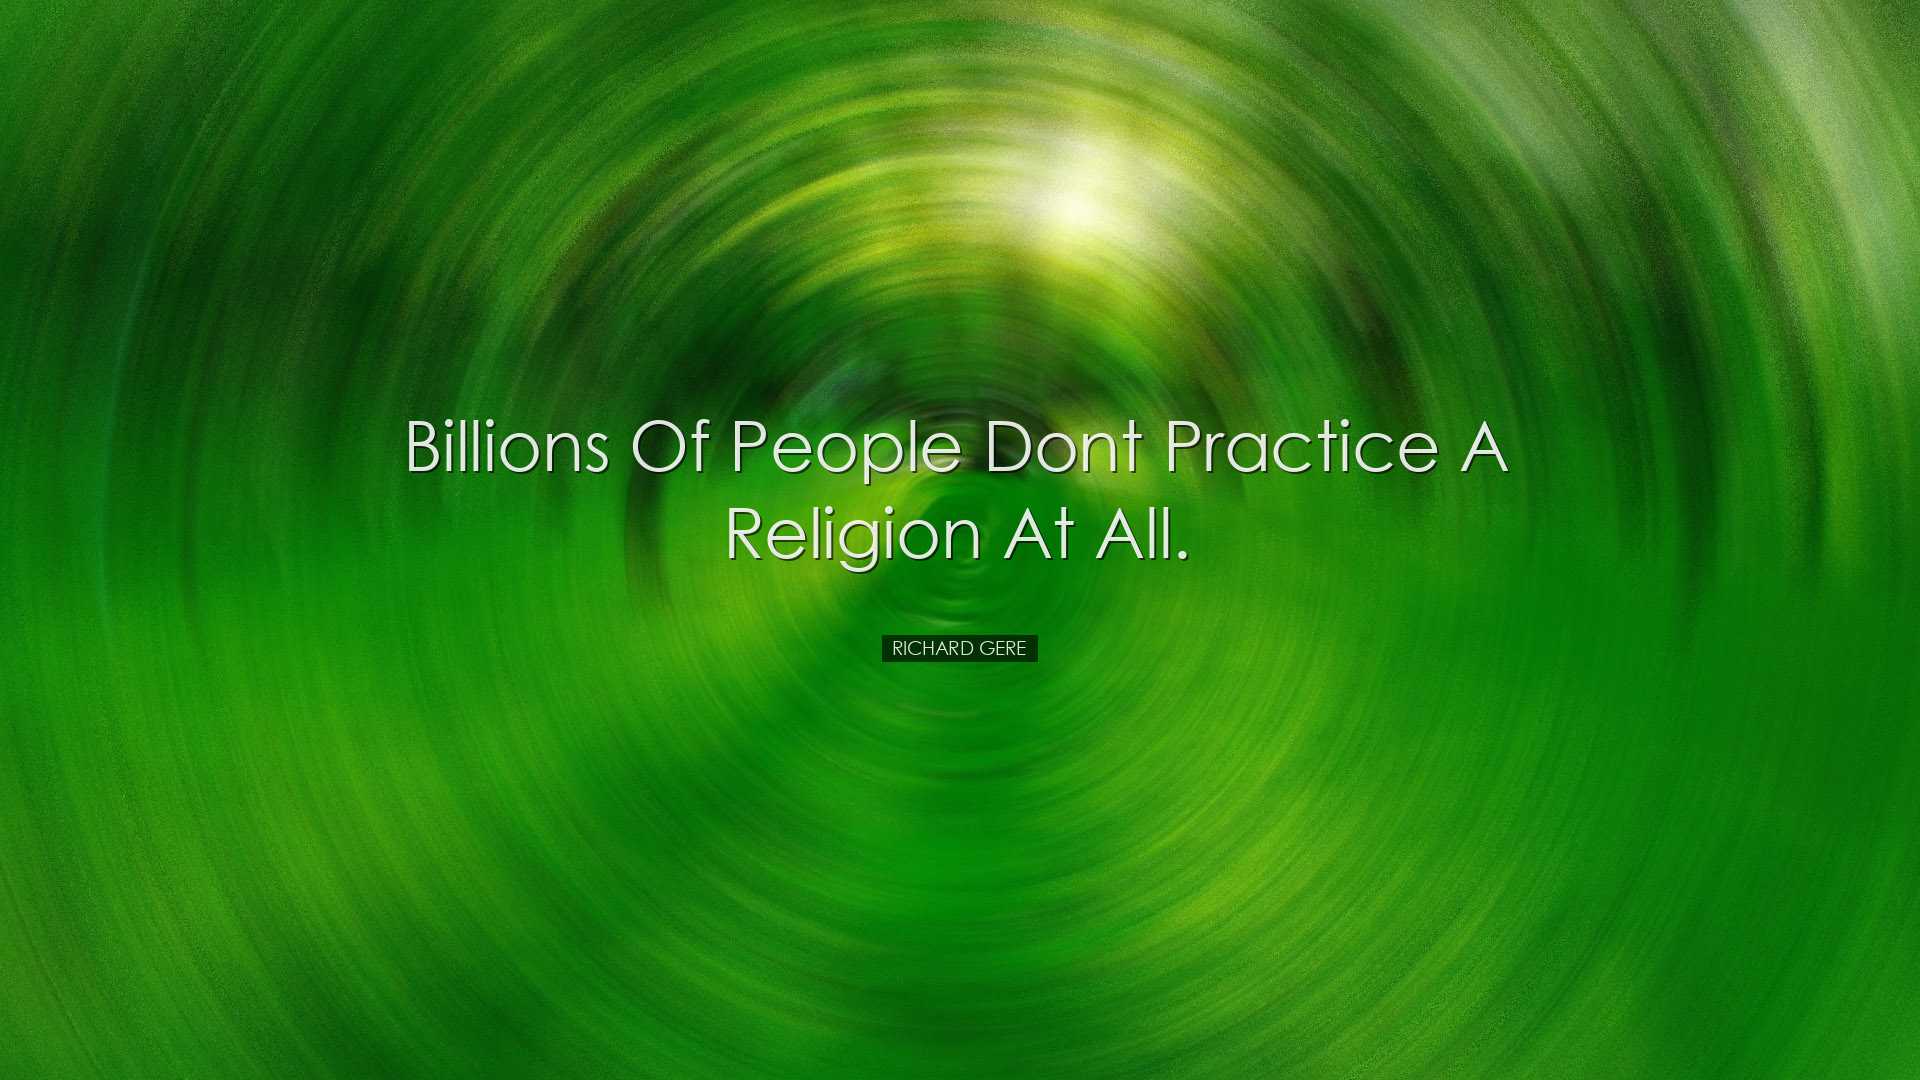 Billions of people dont practice a religion at all. - Richard Gere